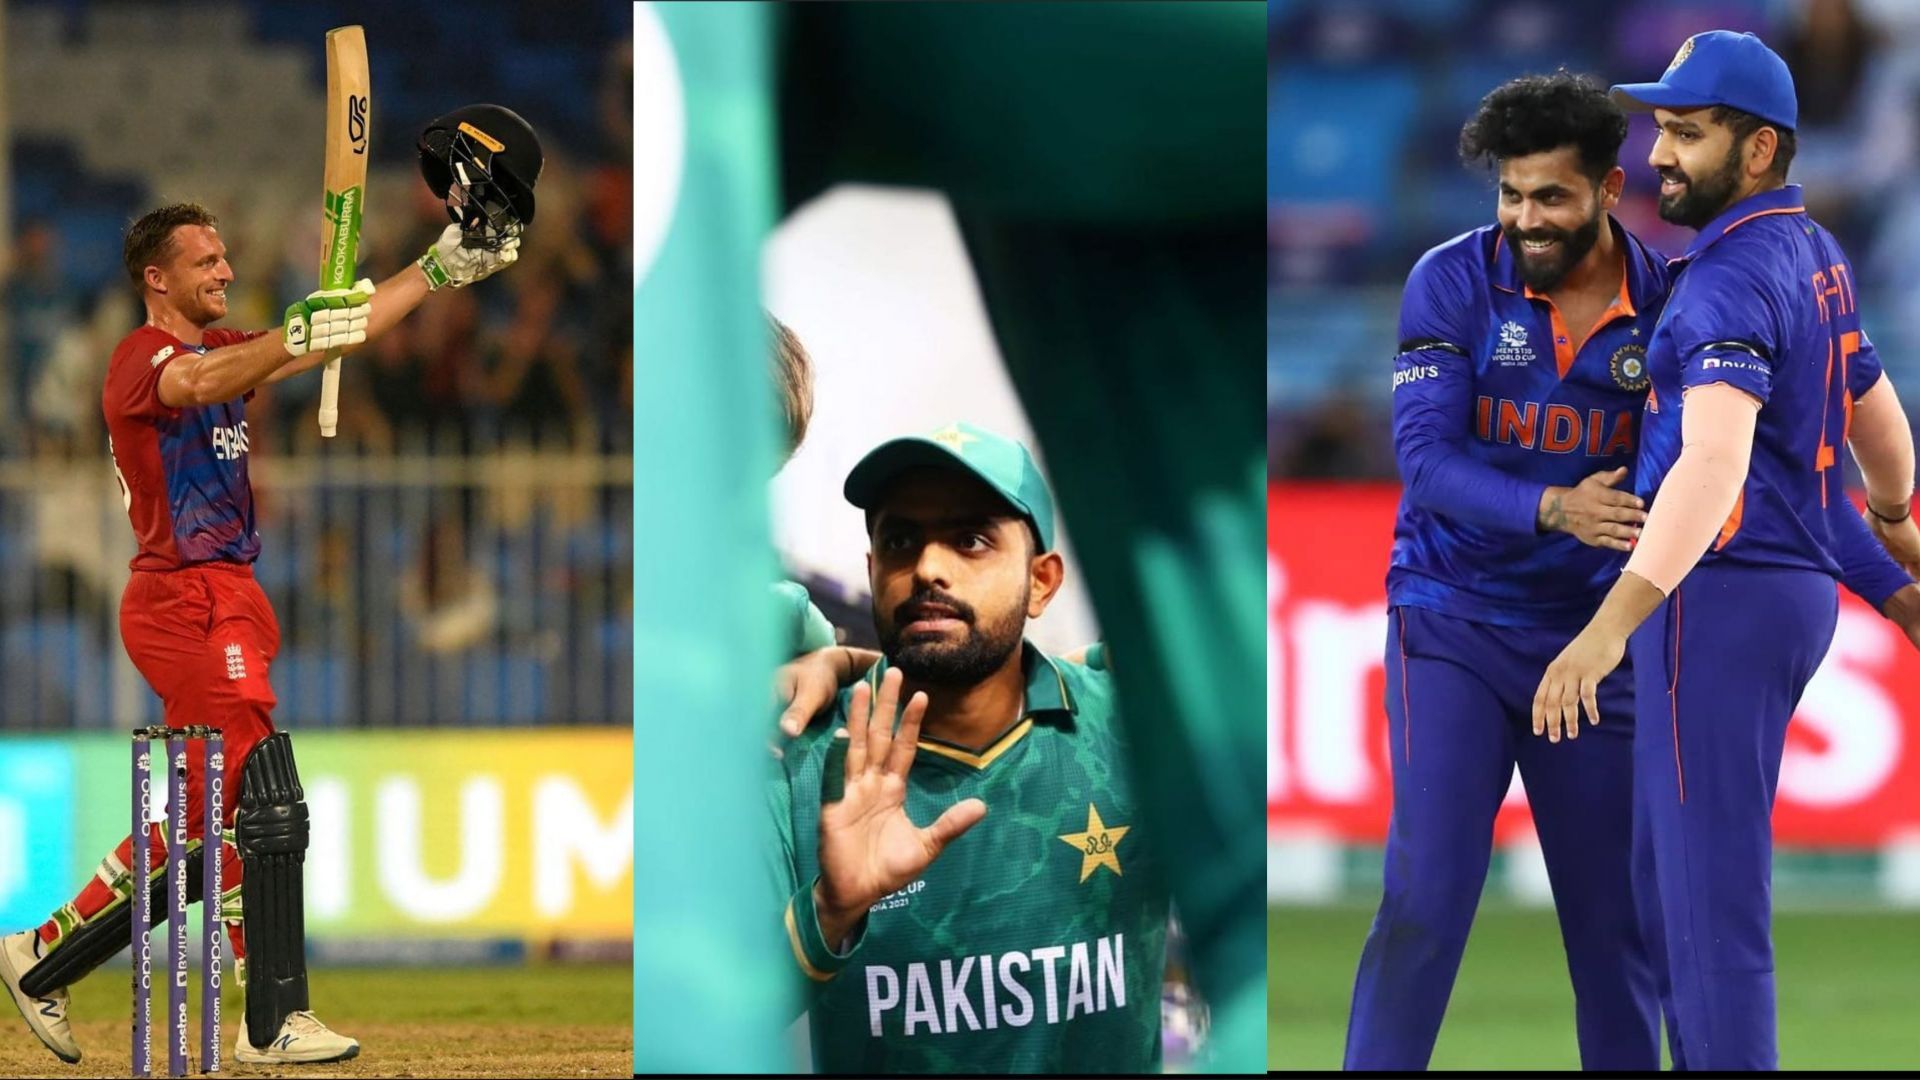 (L-R): Jos Buttler, Babar Azam and Ravindra Jadeja feature in the best playing XI of the ICC T20 World Cup 2021 Super 12 stage (Image Source: Instagram)